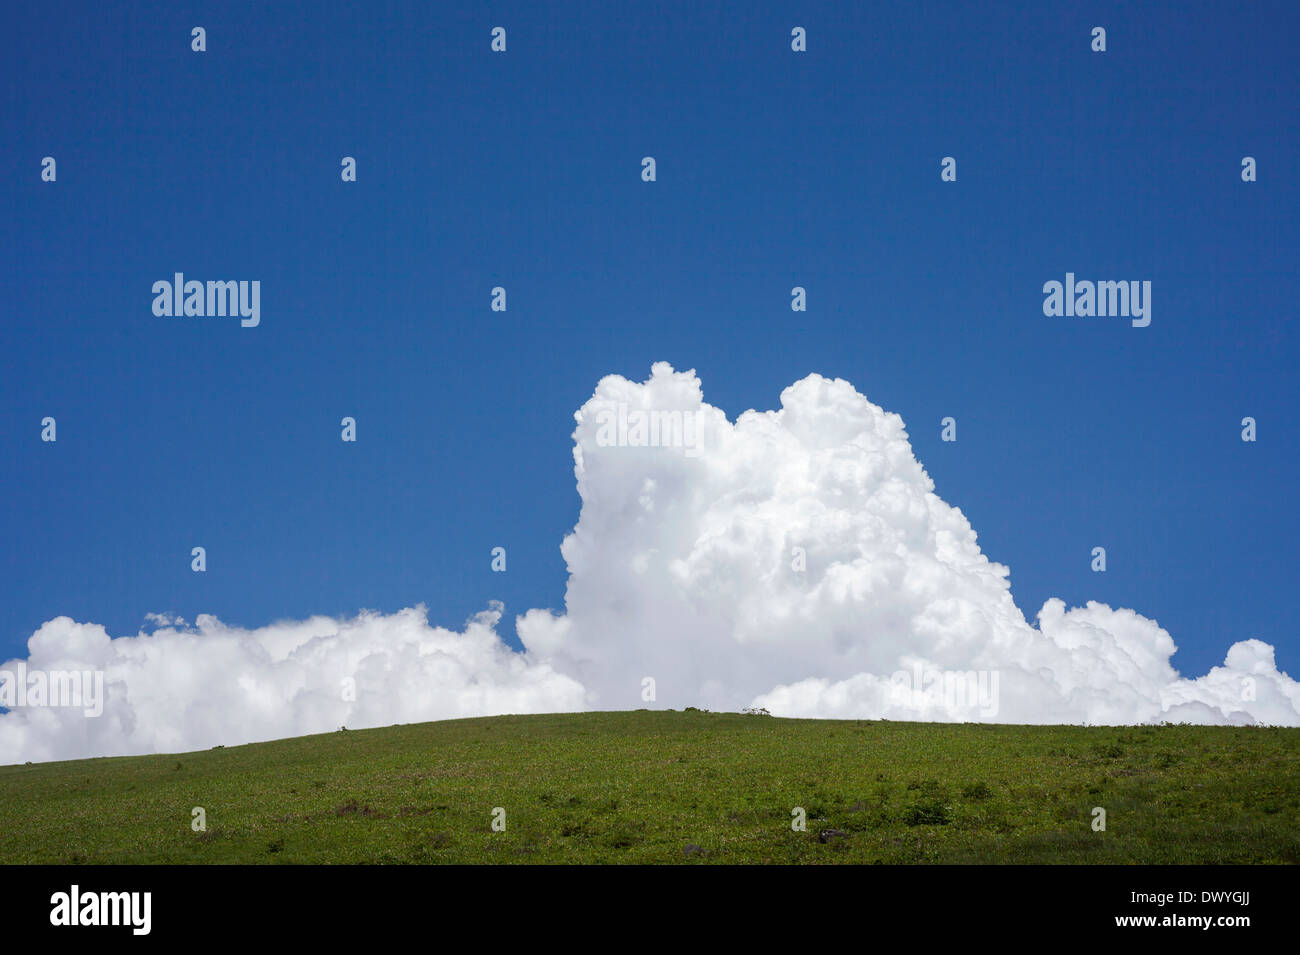 Clouds in Blue Sky and Grassland, Nagano Prefecture, Japan Stock Photo